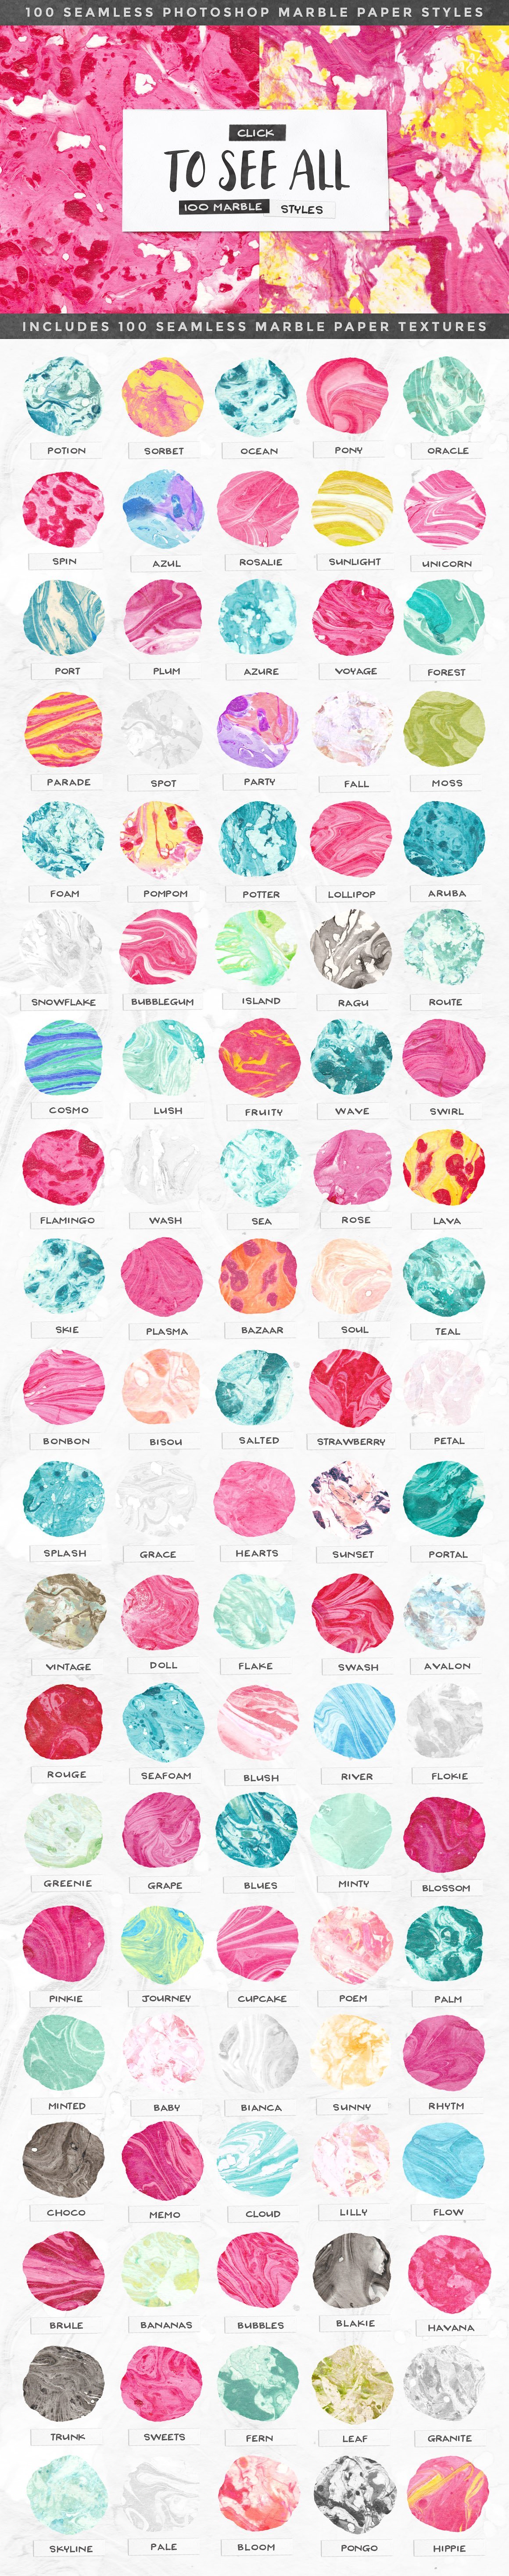 100 Photoshop Marble Paper Layer Styles